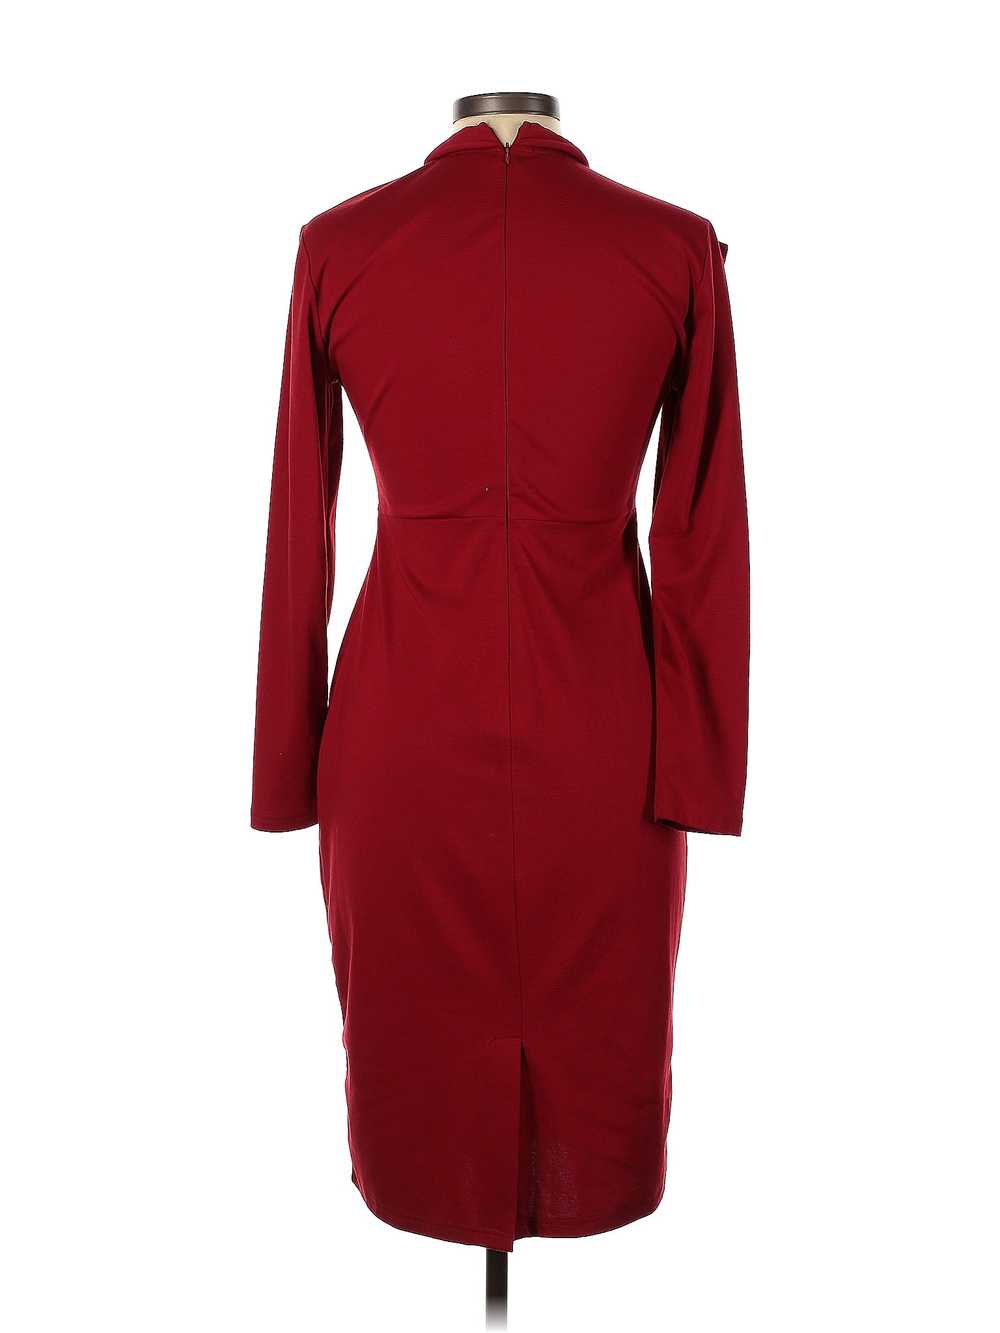 Assorted Brands Women Red Casual Dress L - image 2